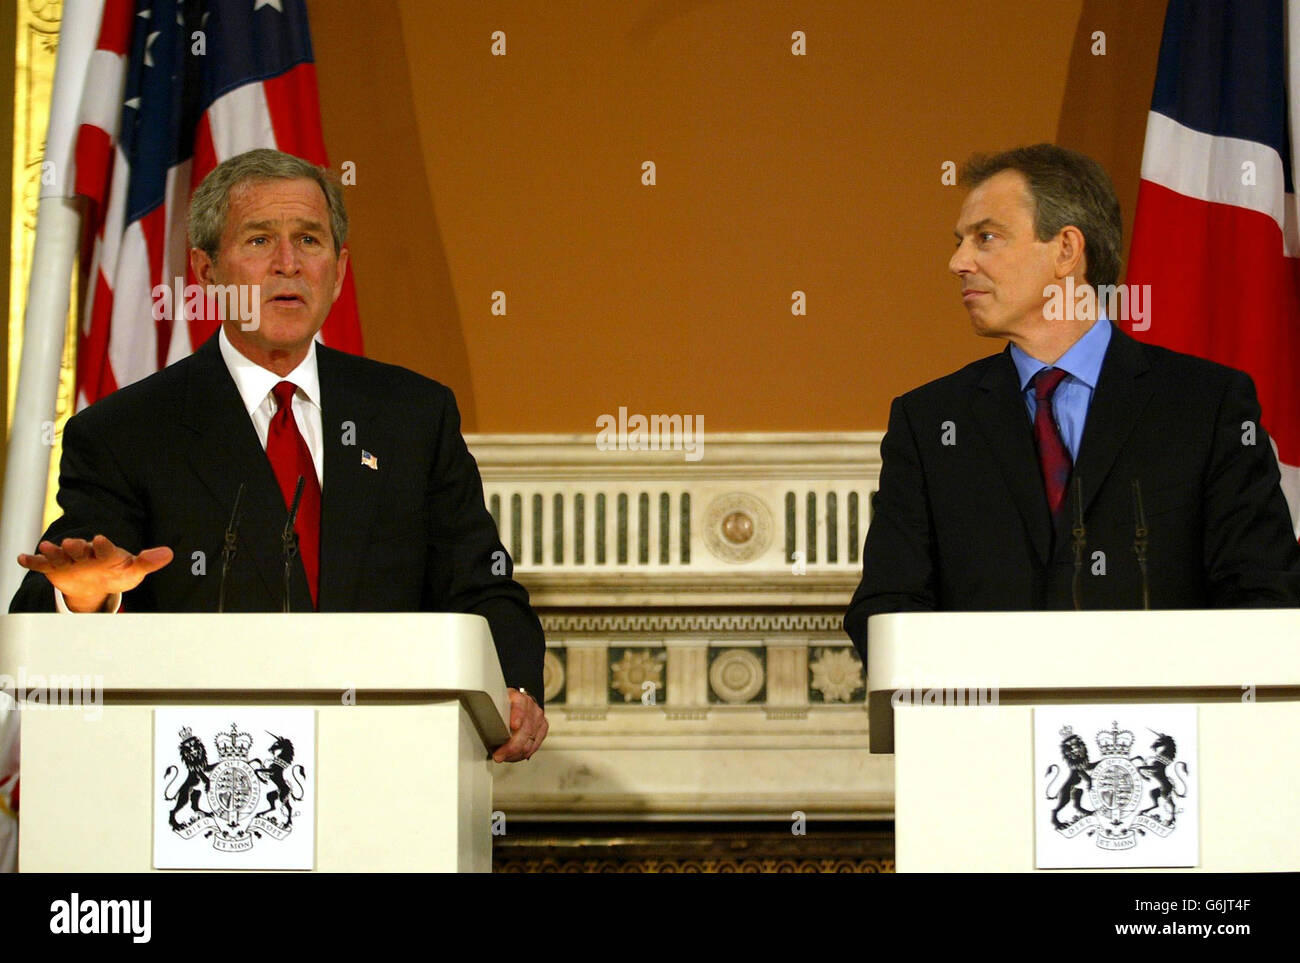 British Prime Minister Tony Blair (R) alongside US President George Bush speaking during a joint press conference at the Foreign Office in London. Mr Blair said the attacks of the British Consulate in Istanbul, demonstrated 'the evil these terrorists pose to innocent people everywhere'. President Bush added his condemnation of the Istanbul attacks, saying that it showed again that the terrorists 'hate freedom'. Stock Photo